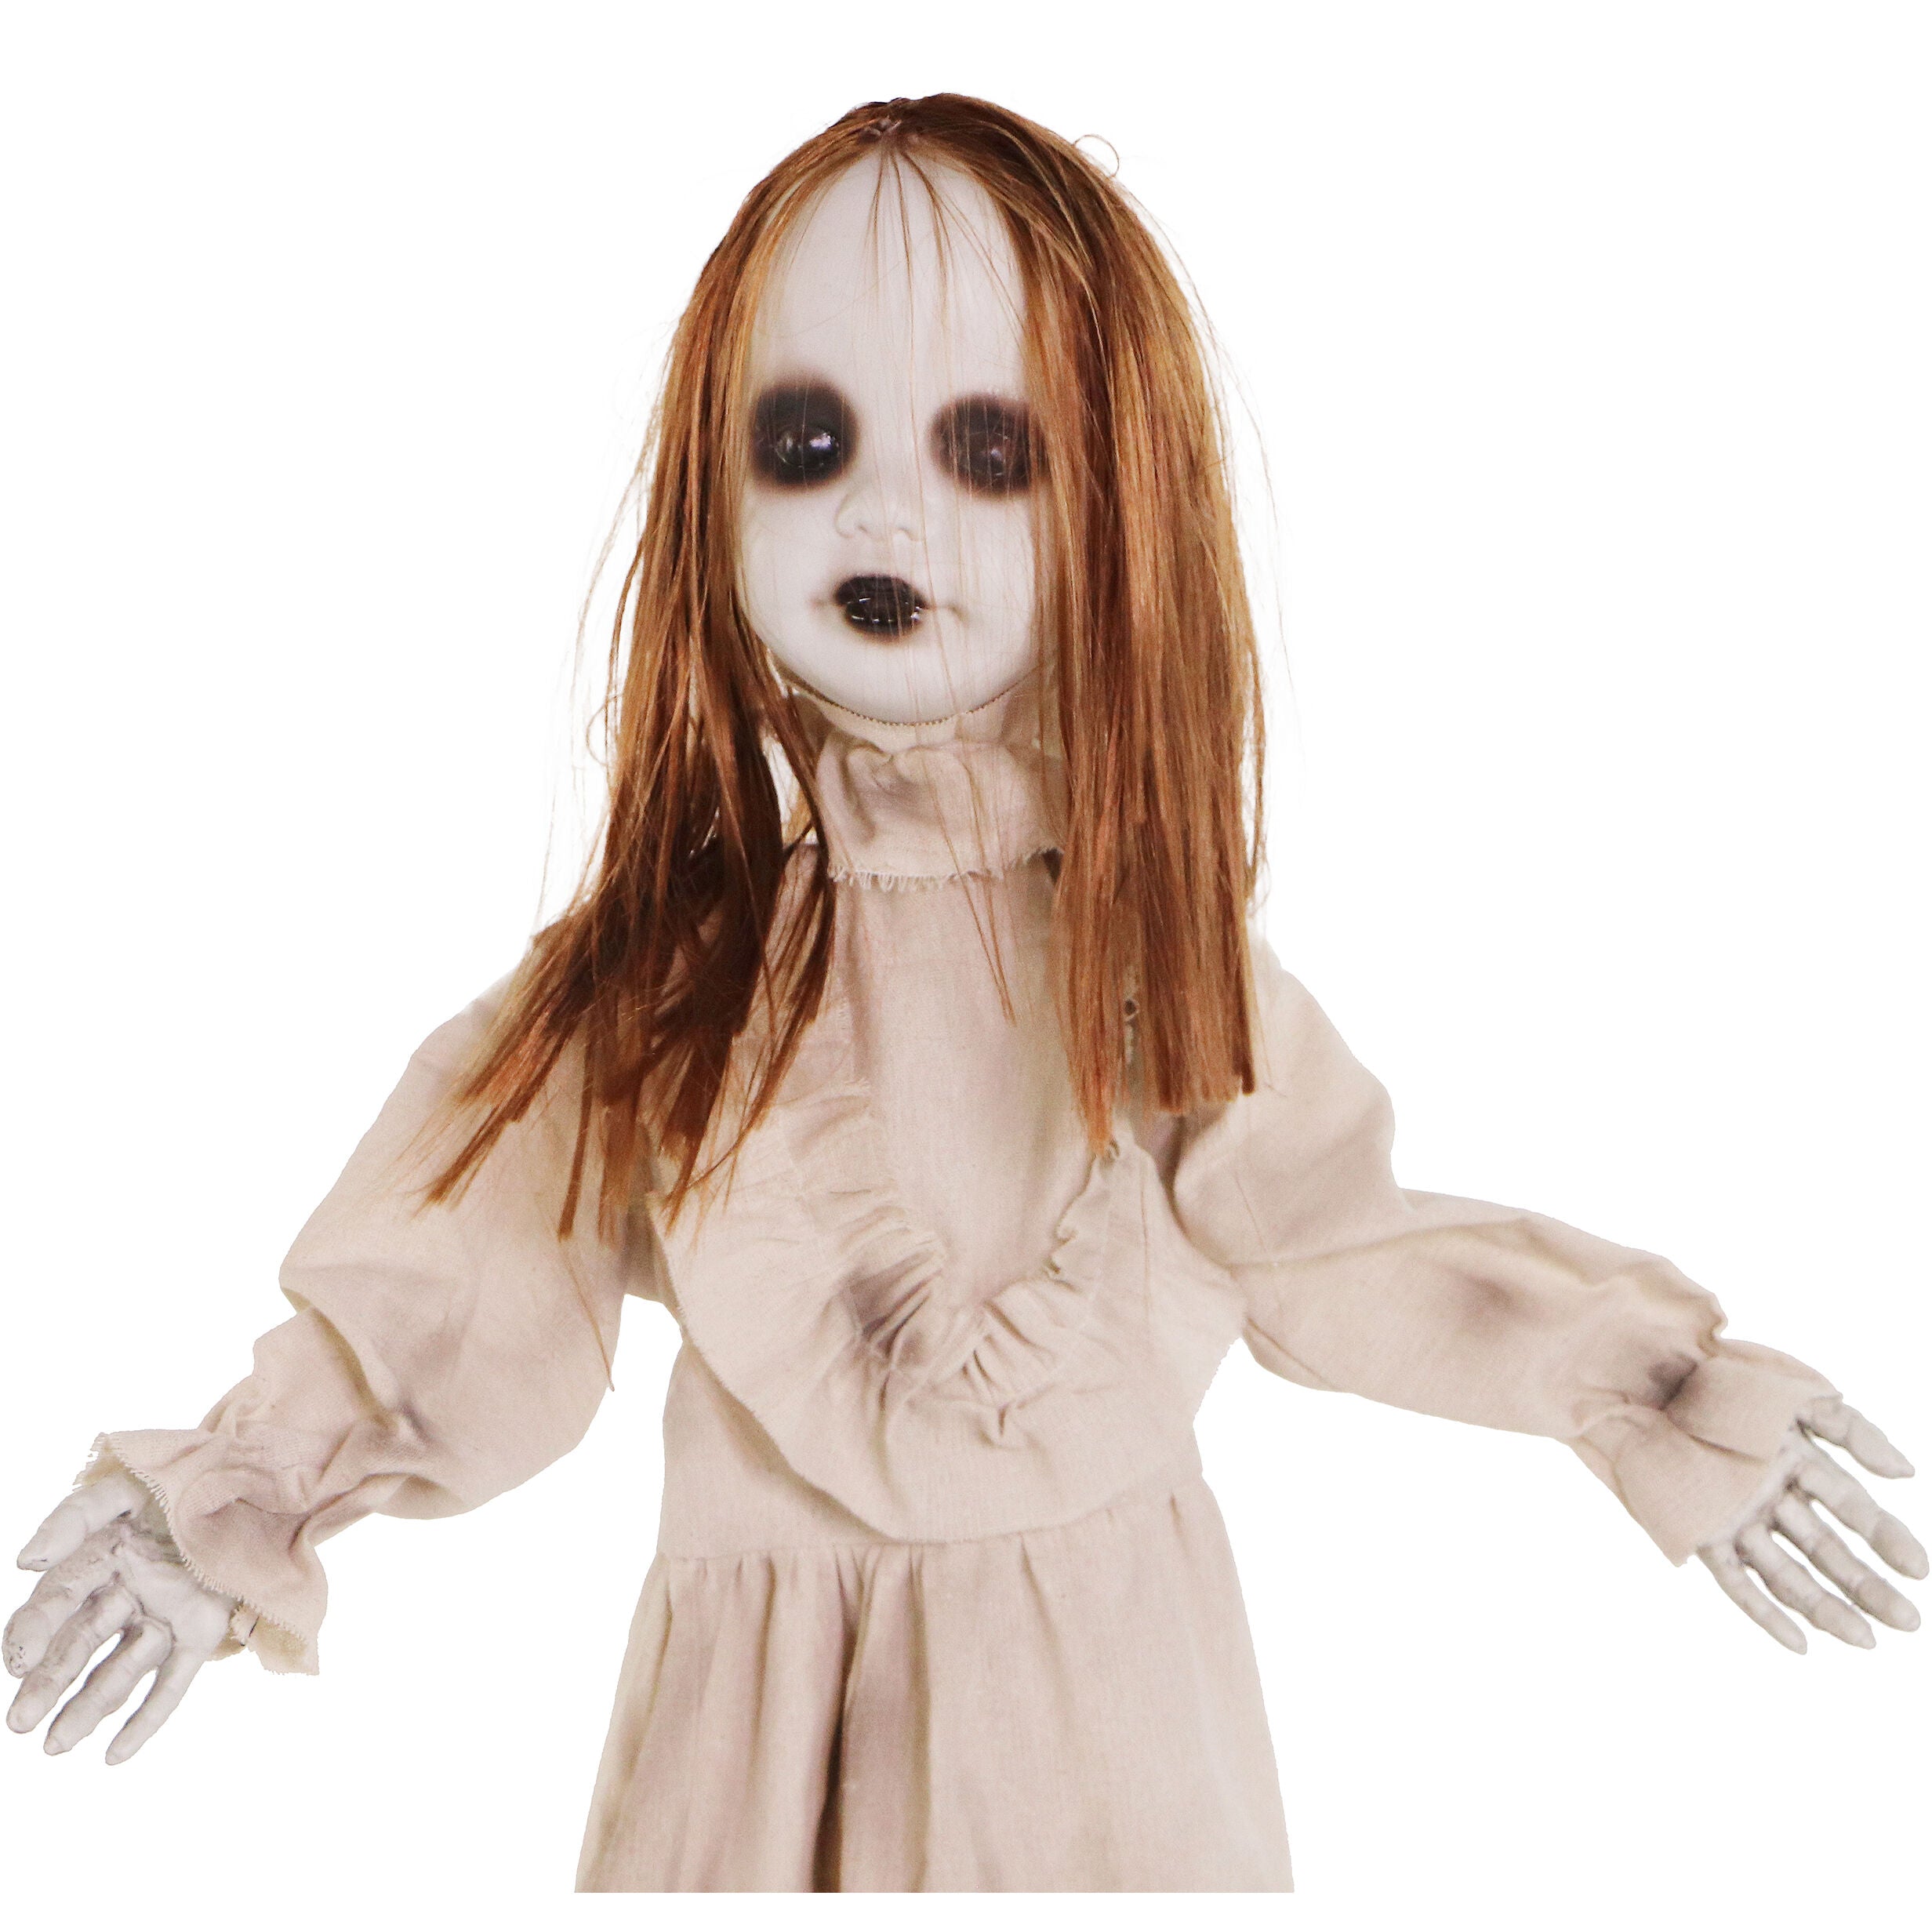 Haunted Hill Farm - Floating, Talking Zombie Girl Animatronic with Blue Chest Light for Scary Hanging Halloween Decoration